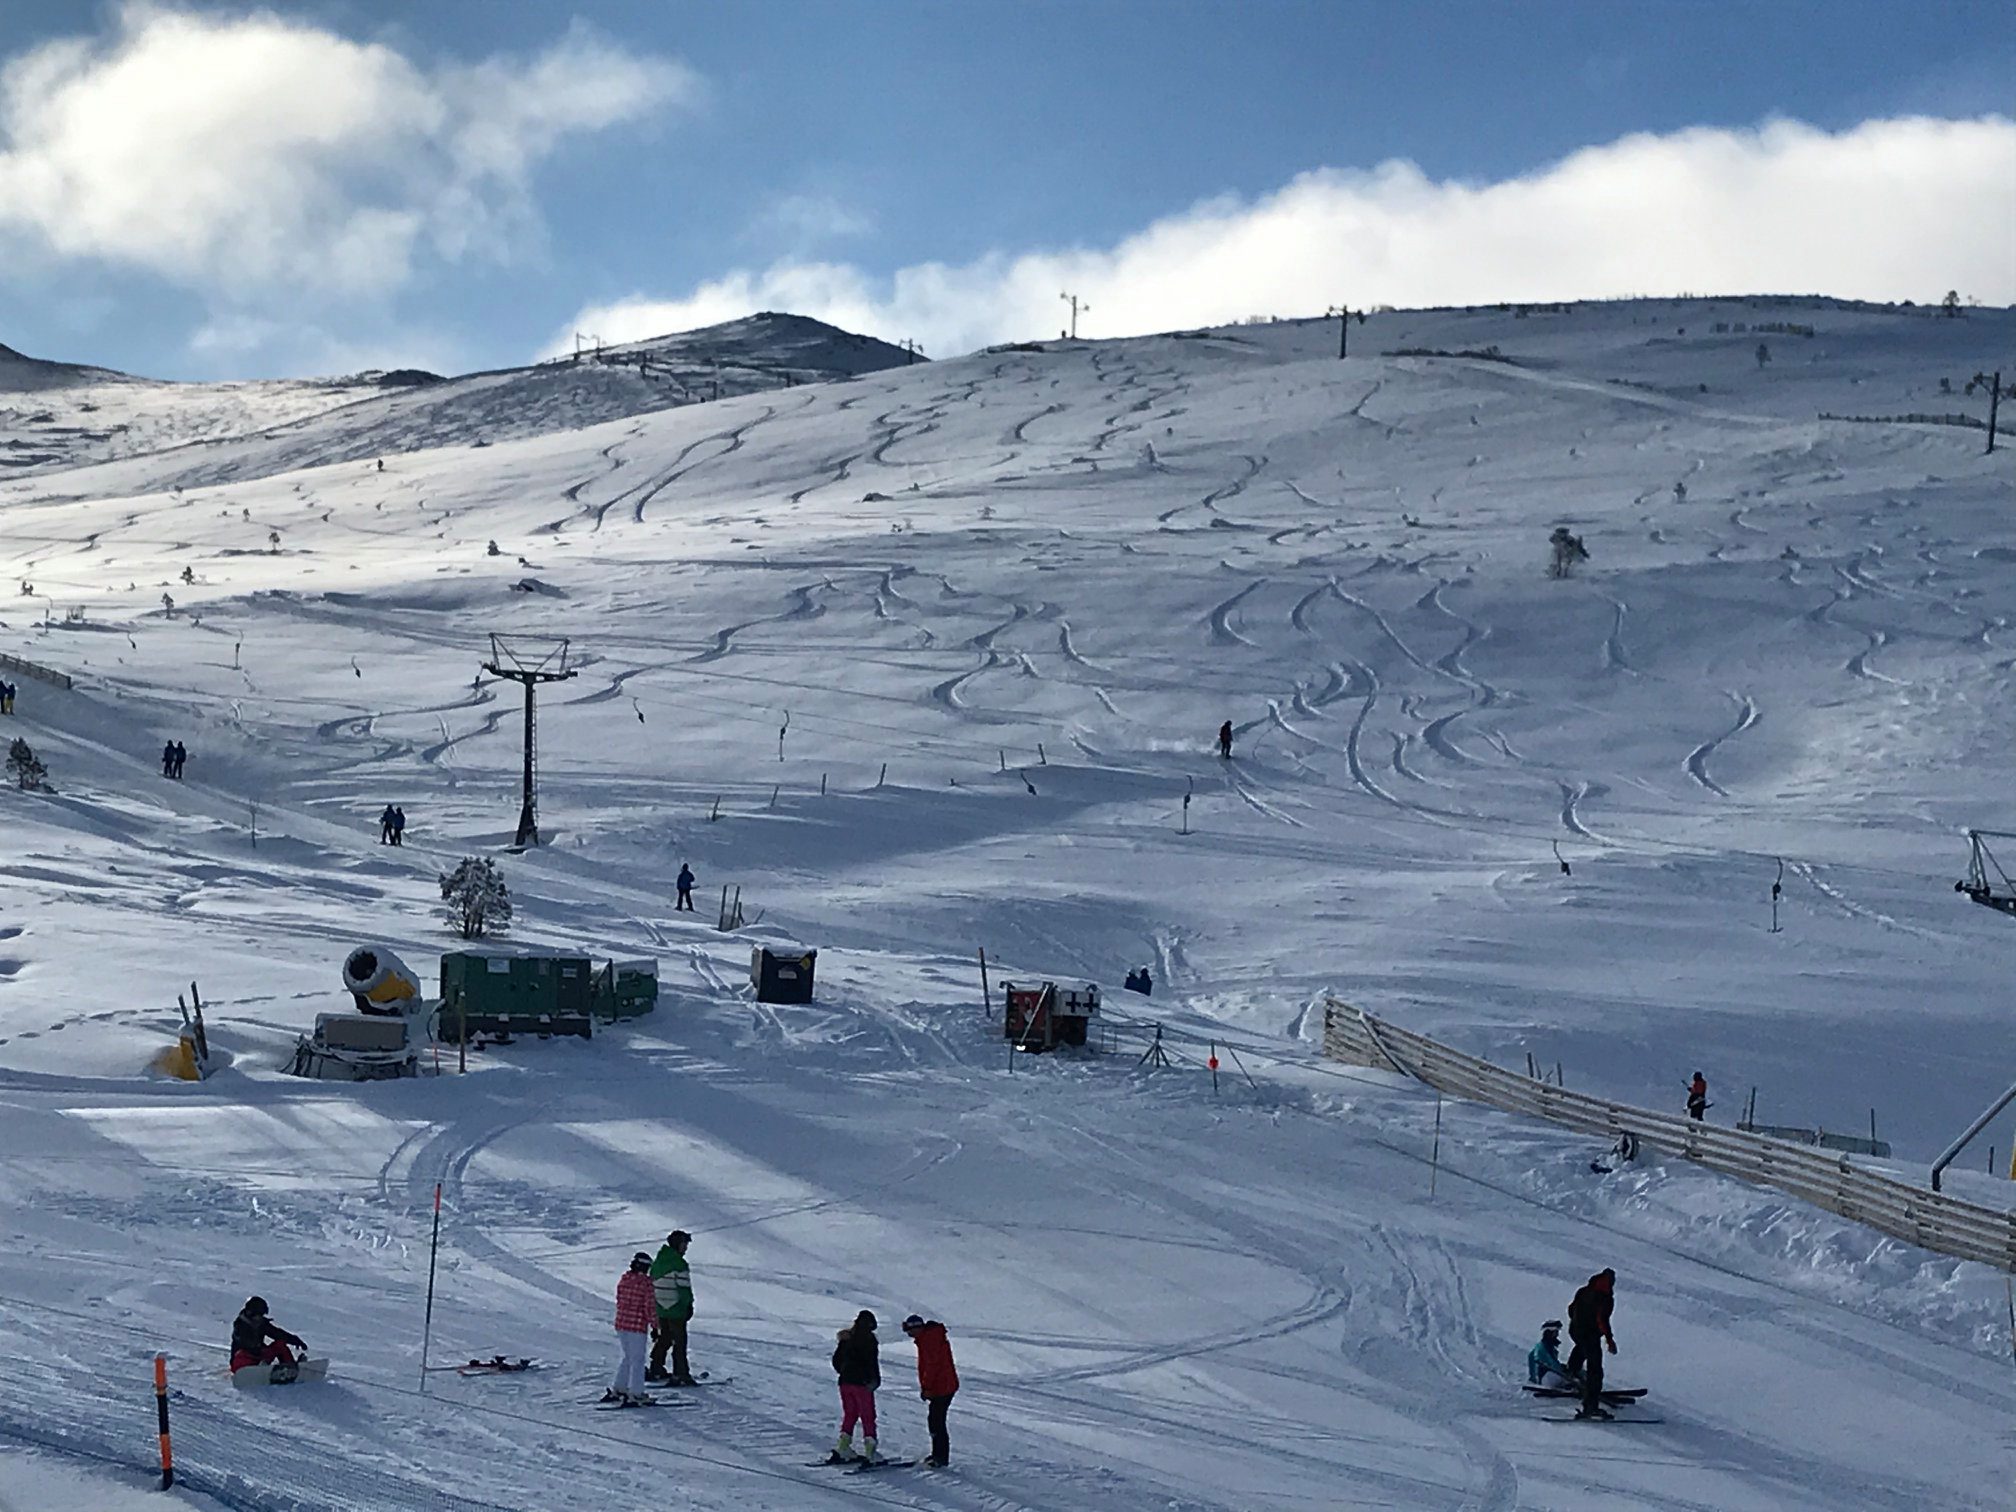 the most terrain open at Highland ski areas, Cairngorm